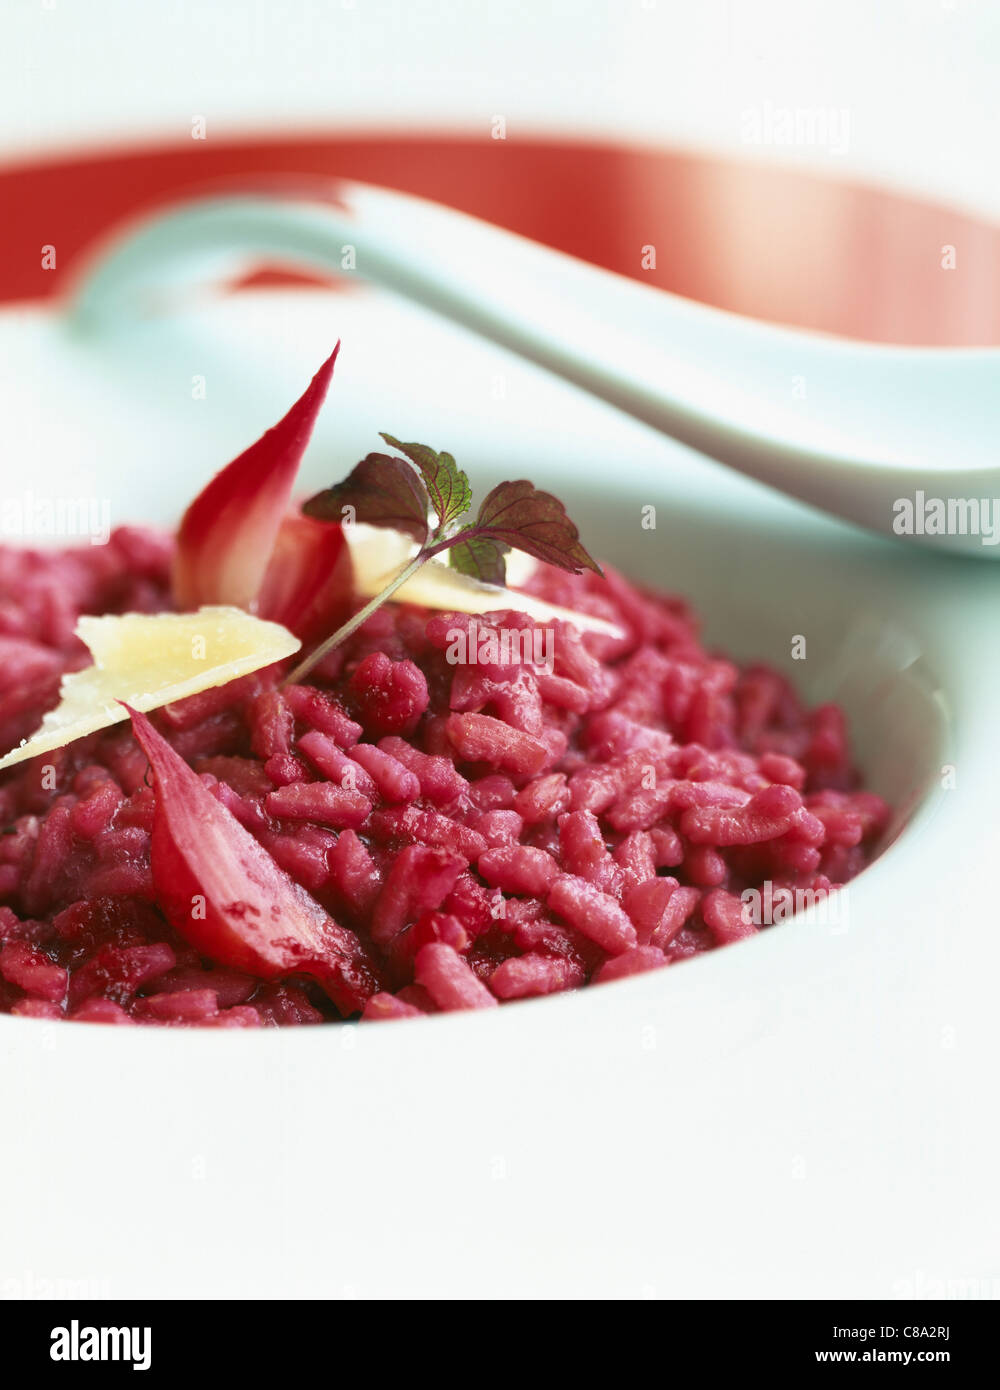 Beetroot risotto Stock Photo